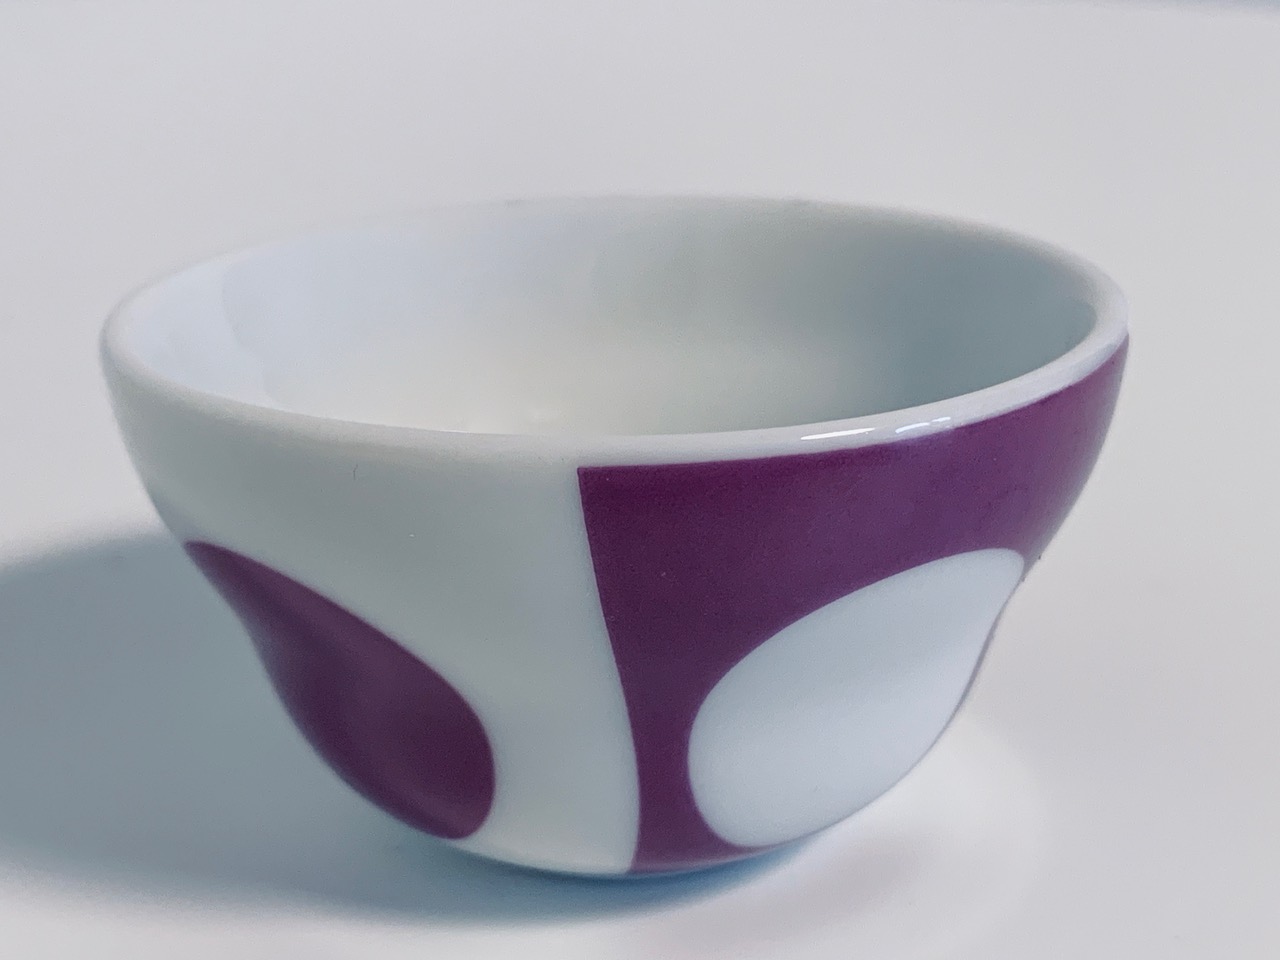 Image of the Verner Panton Menu egg cup purple offered in this ad.